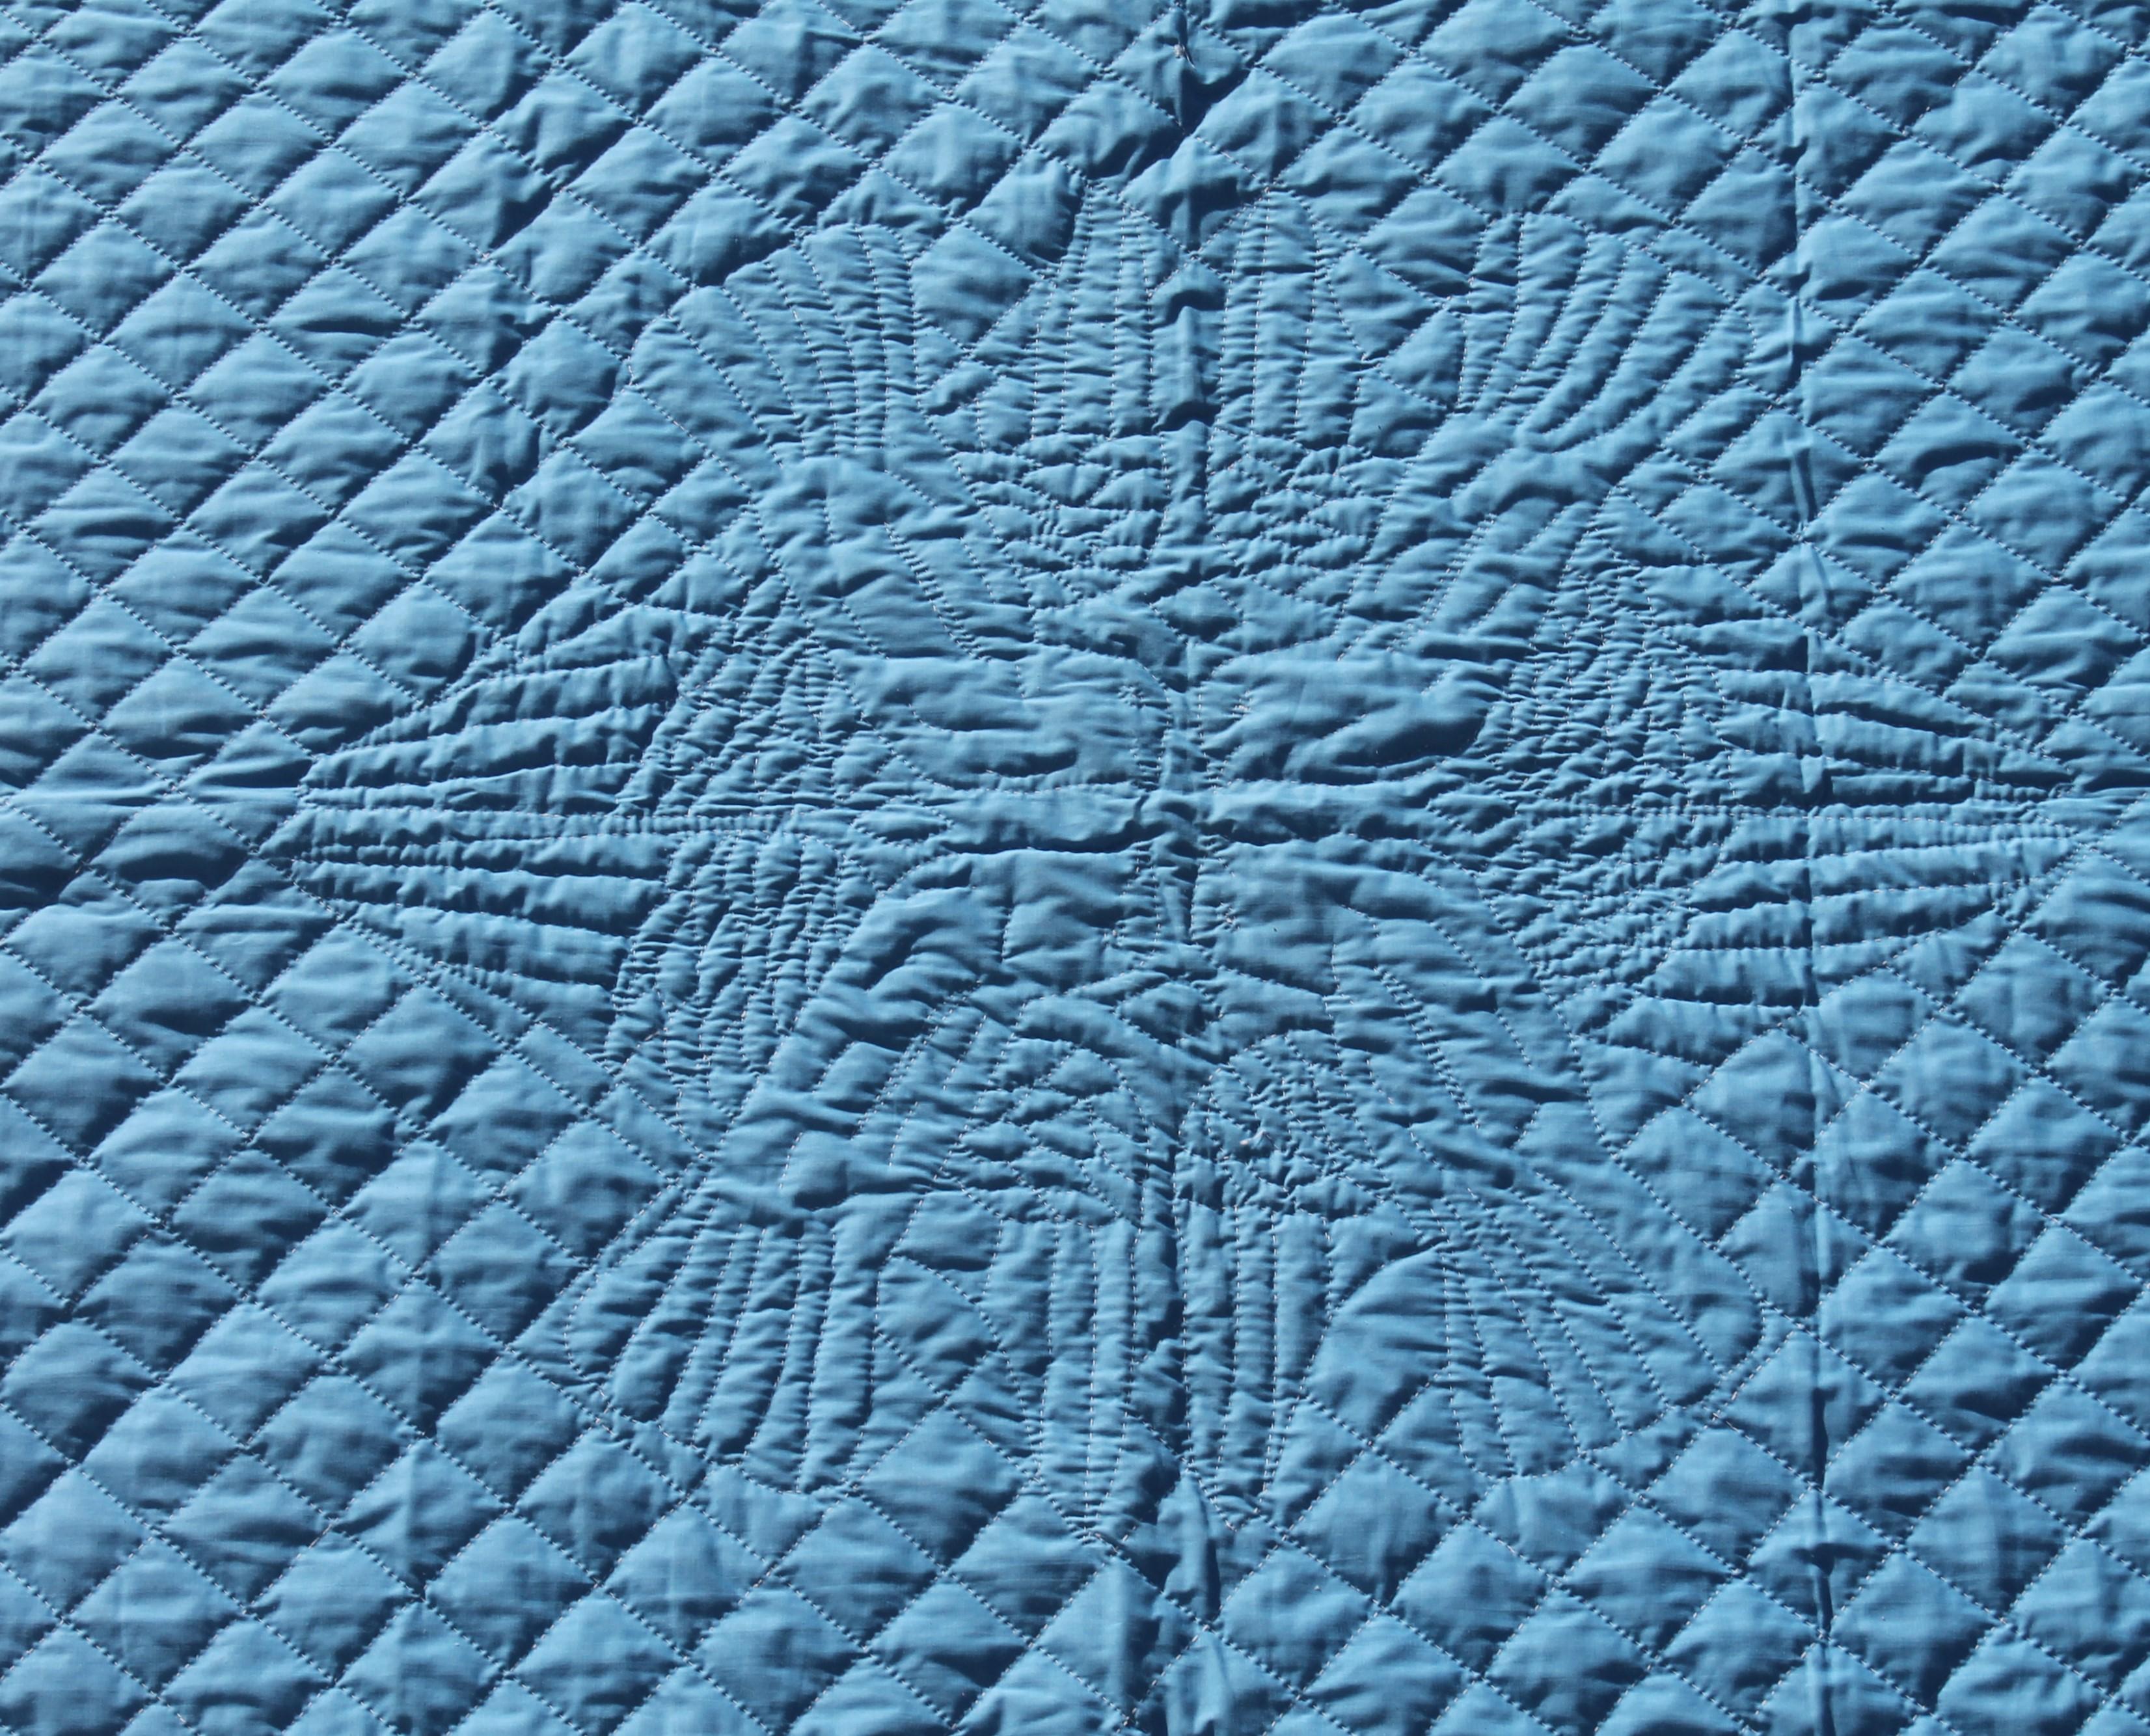 This finely quilted bridal quilt is reversible and was made in Lancaster County Pennsylvania. It is blue on one side and white on the other side. Heavy beautiful feather quilting. Would make a Fantastic wedding gift Take notice of the four doves in